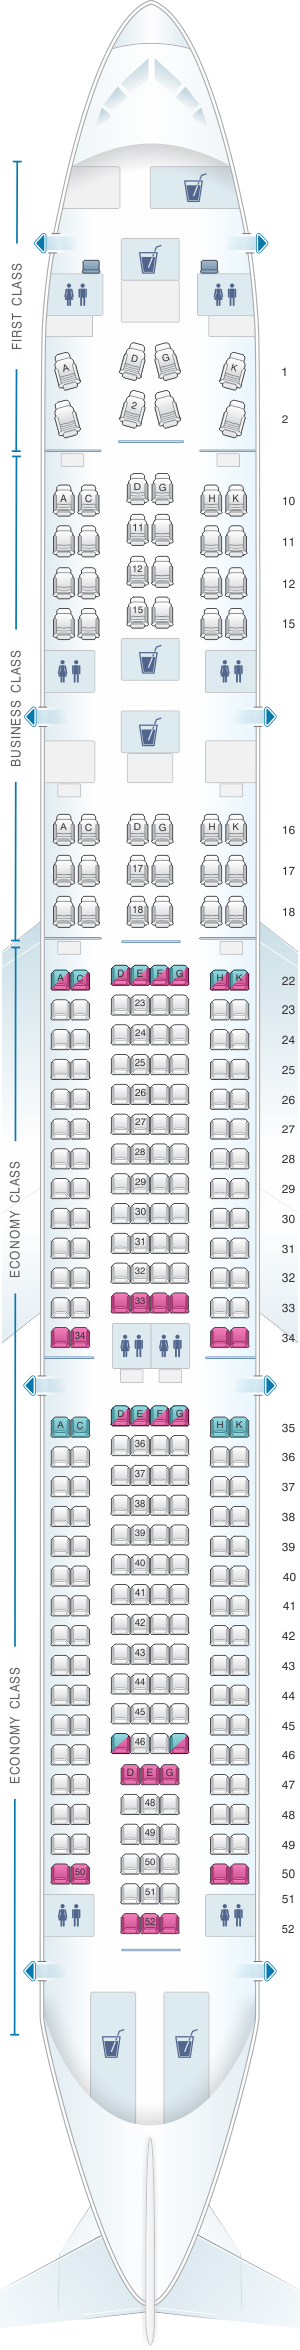 Seat map for Cathay Pacific Airways Cathay Dragon Airbus A330 300 (A33R)